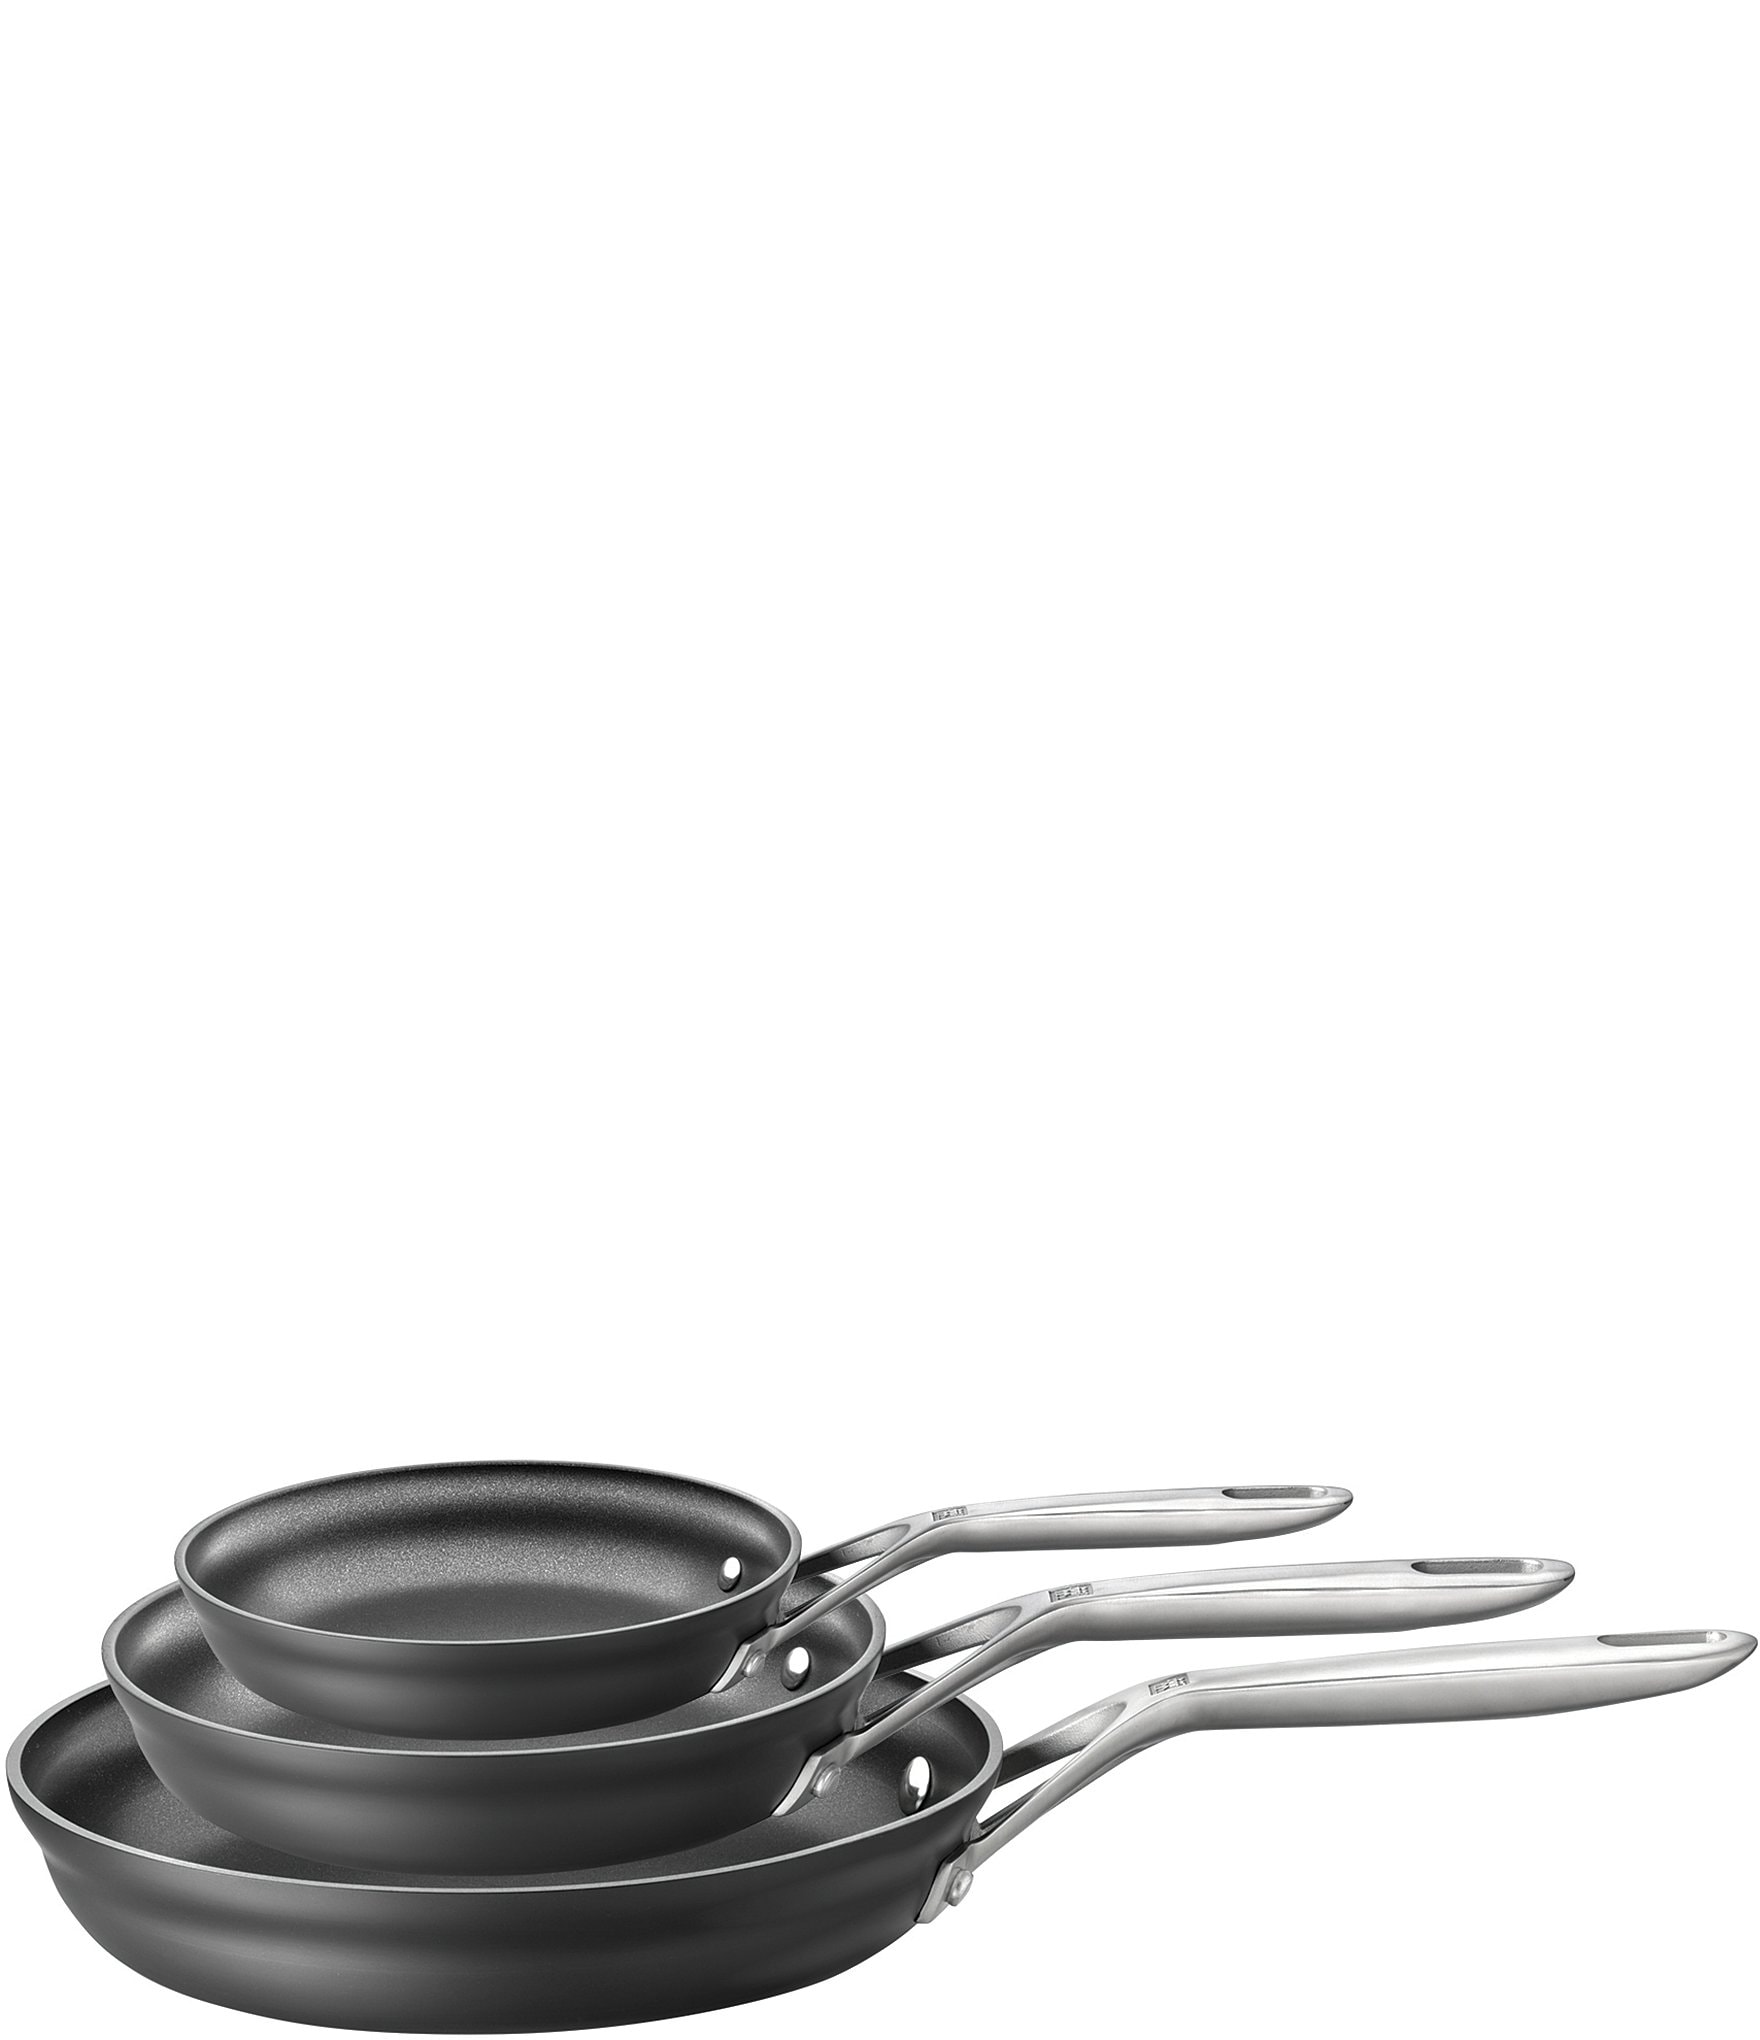 https://dimg.dillards.com/is/image/DillardsZoom/zoom/zwilling-motion-hard-anodized-collection-3-piece-nonstick-fry-pan-set/20100312_zi.jpg